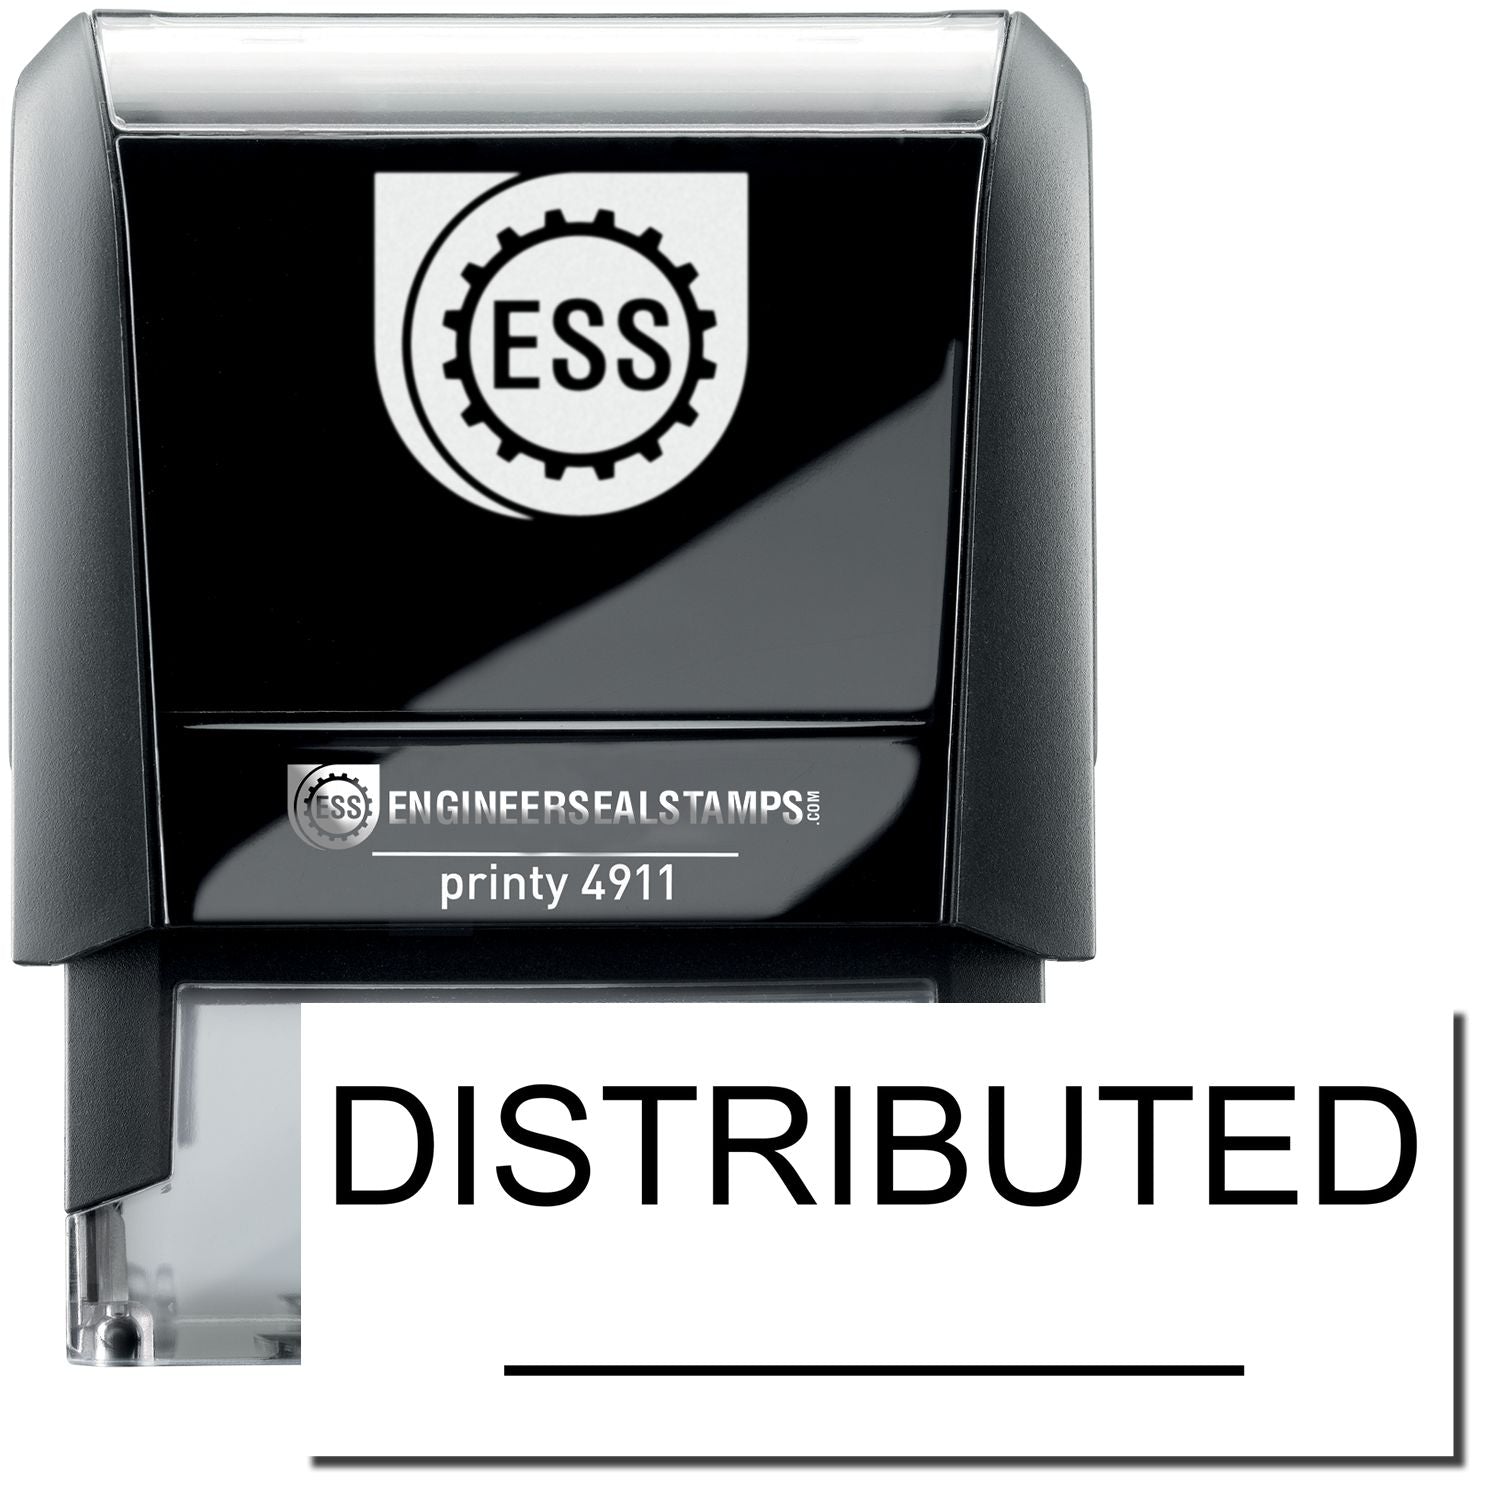 A self-inking stamp with a stamped image showing how the text "DISTRIBUTED" with a line under it is displayed after stamping.